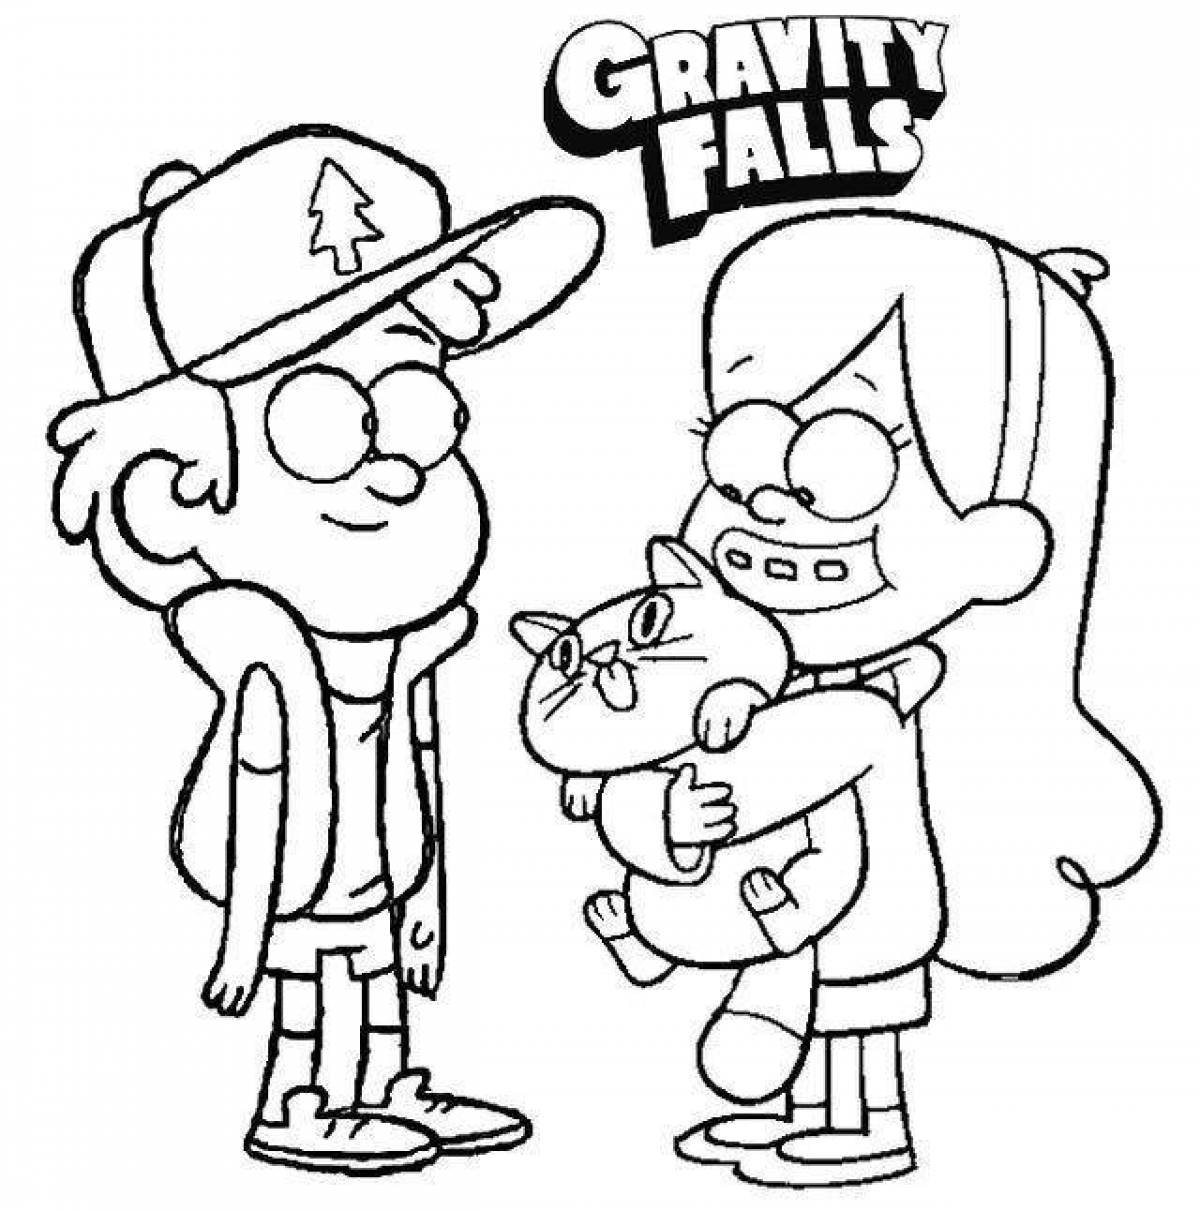 Glowing gravity falls everything coloring page